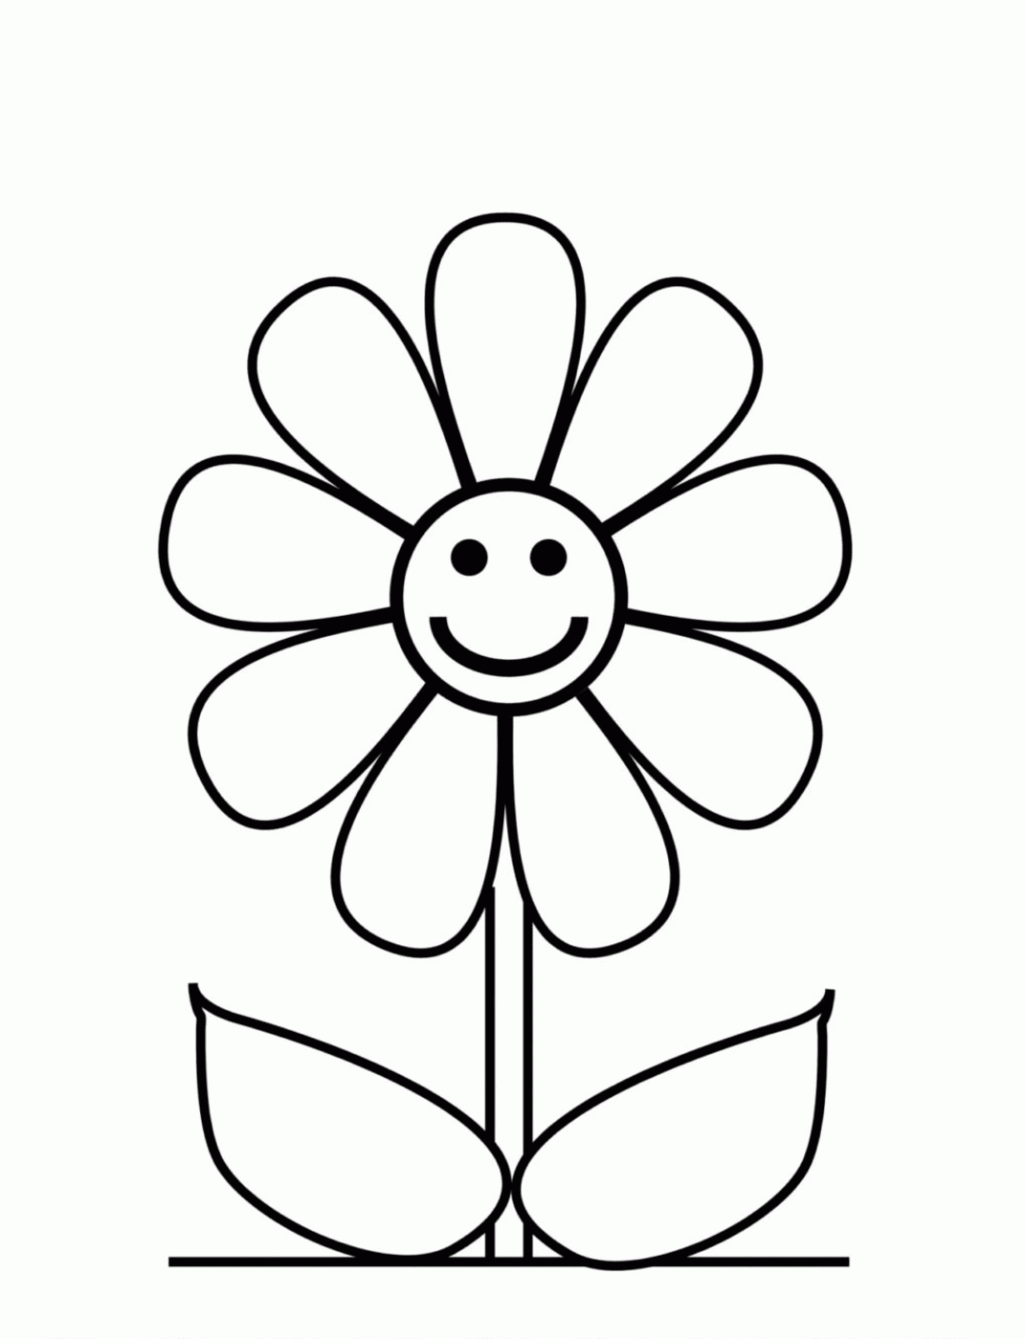 Flower Coloring Pages For Kids To Print Flower Coloring Pages ...